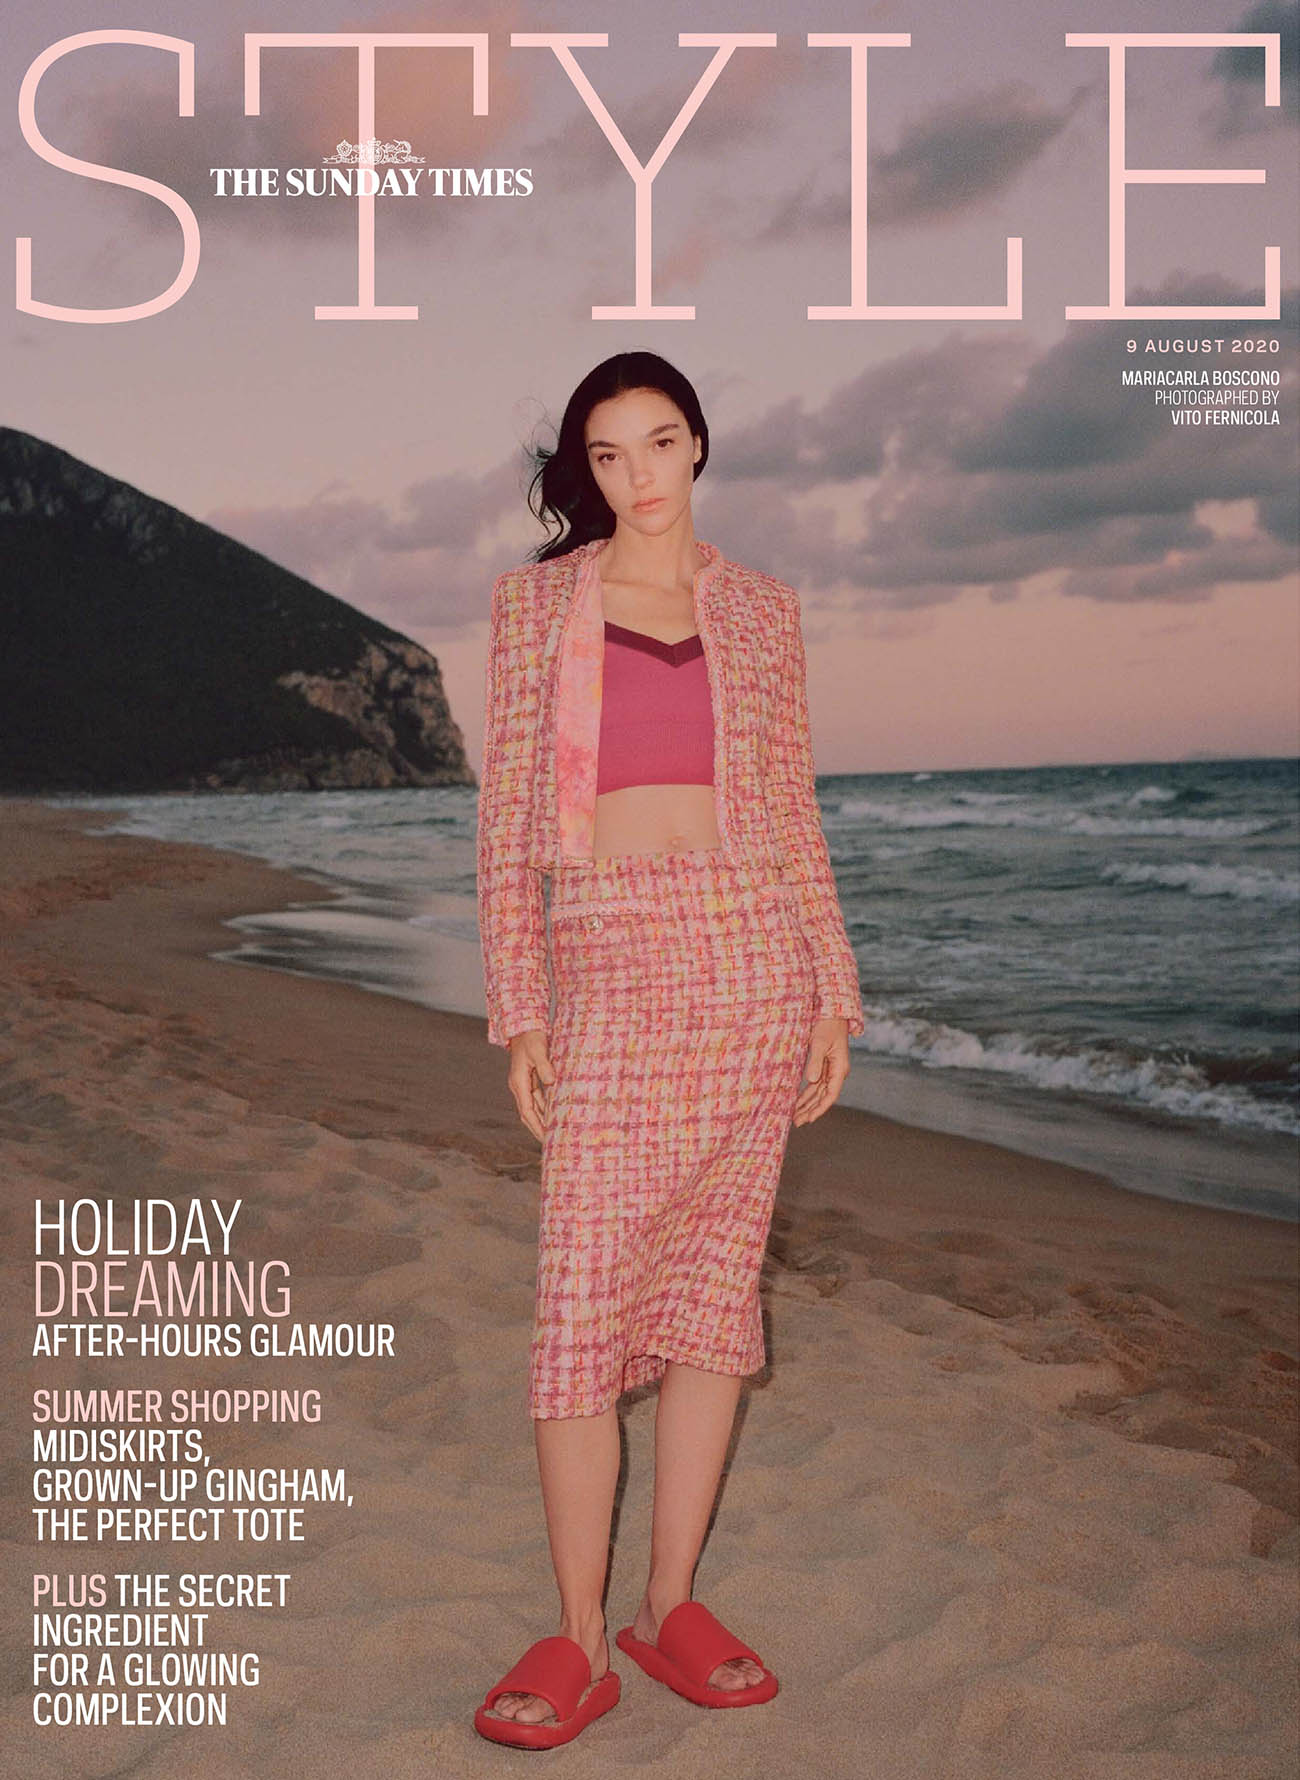 Mariacarla Boscono covers The Sunday Times Style August 9th, 2020 by Vito Fernicola